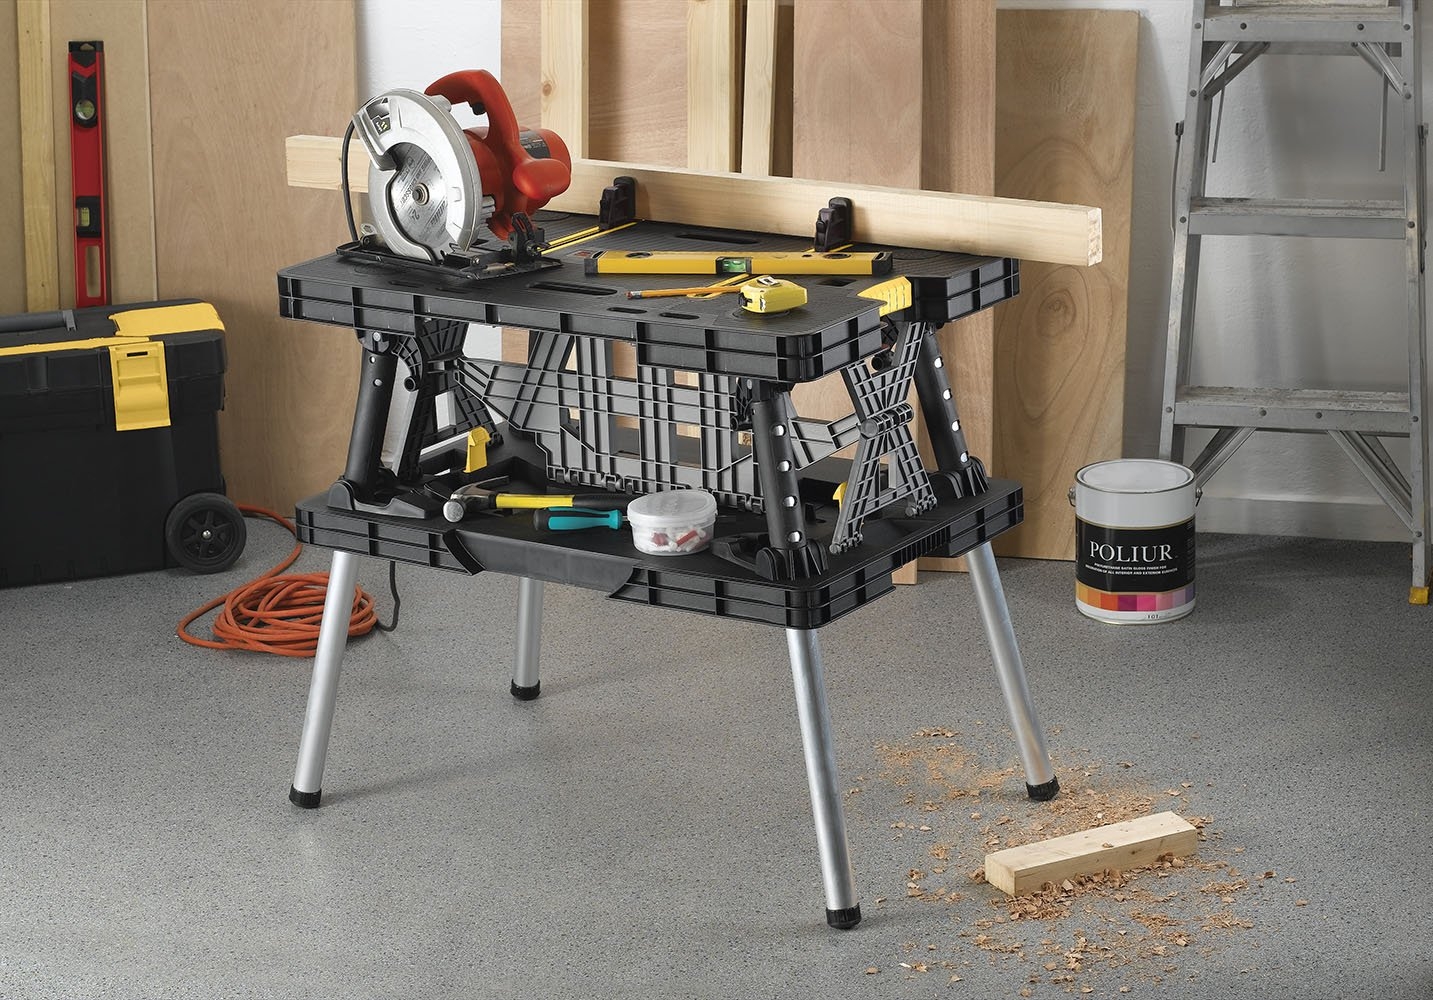 Keter Folding Table Work Bench For Woodworking Tools & Accessories with Clamps